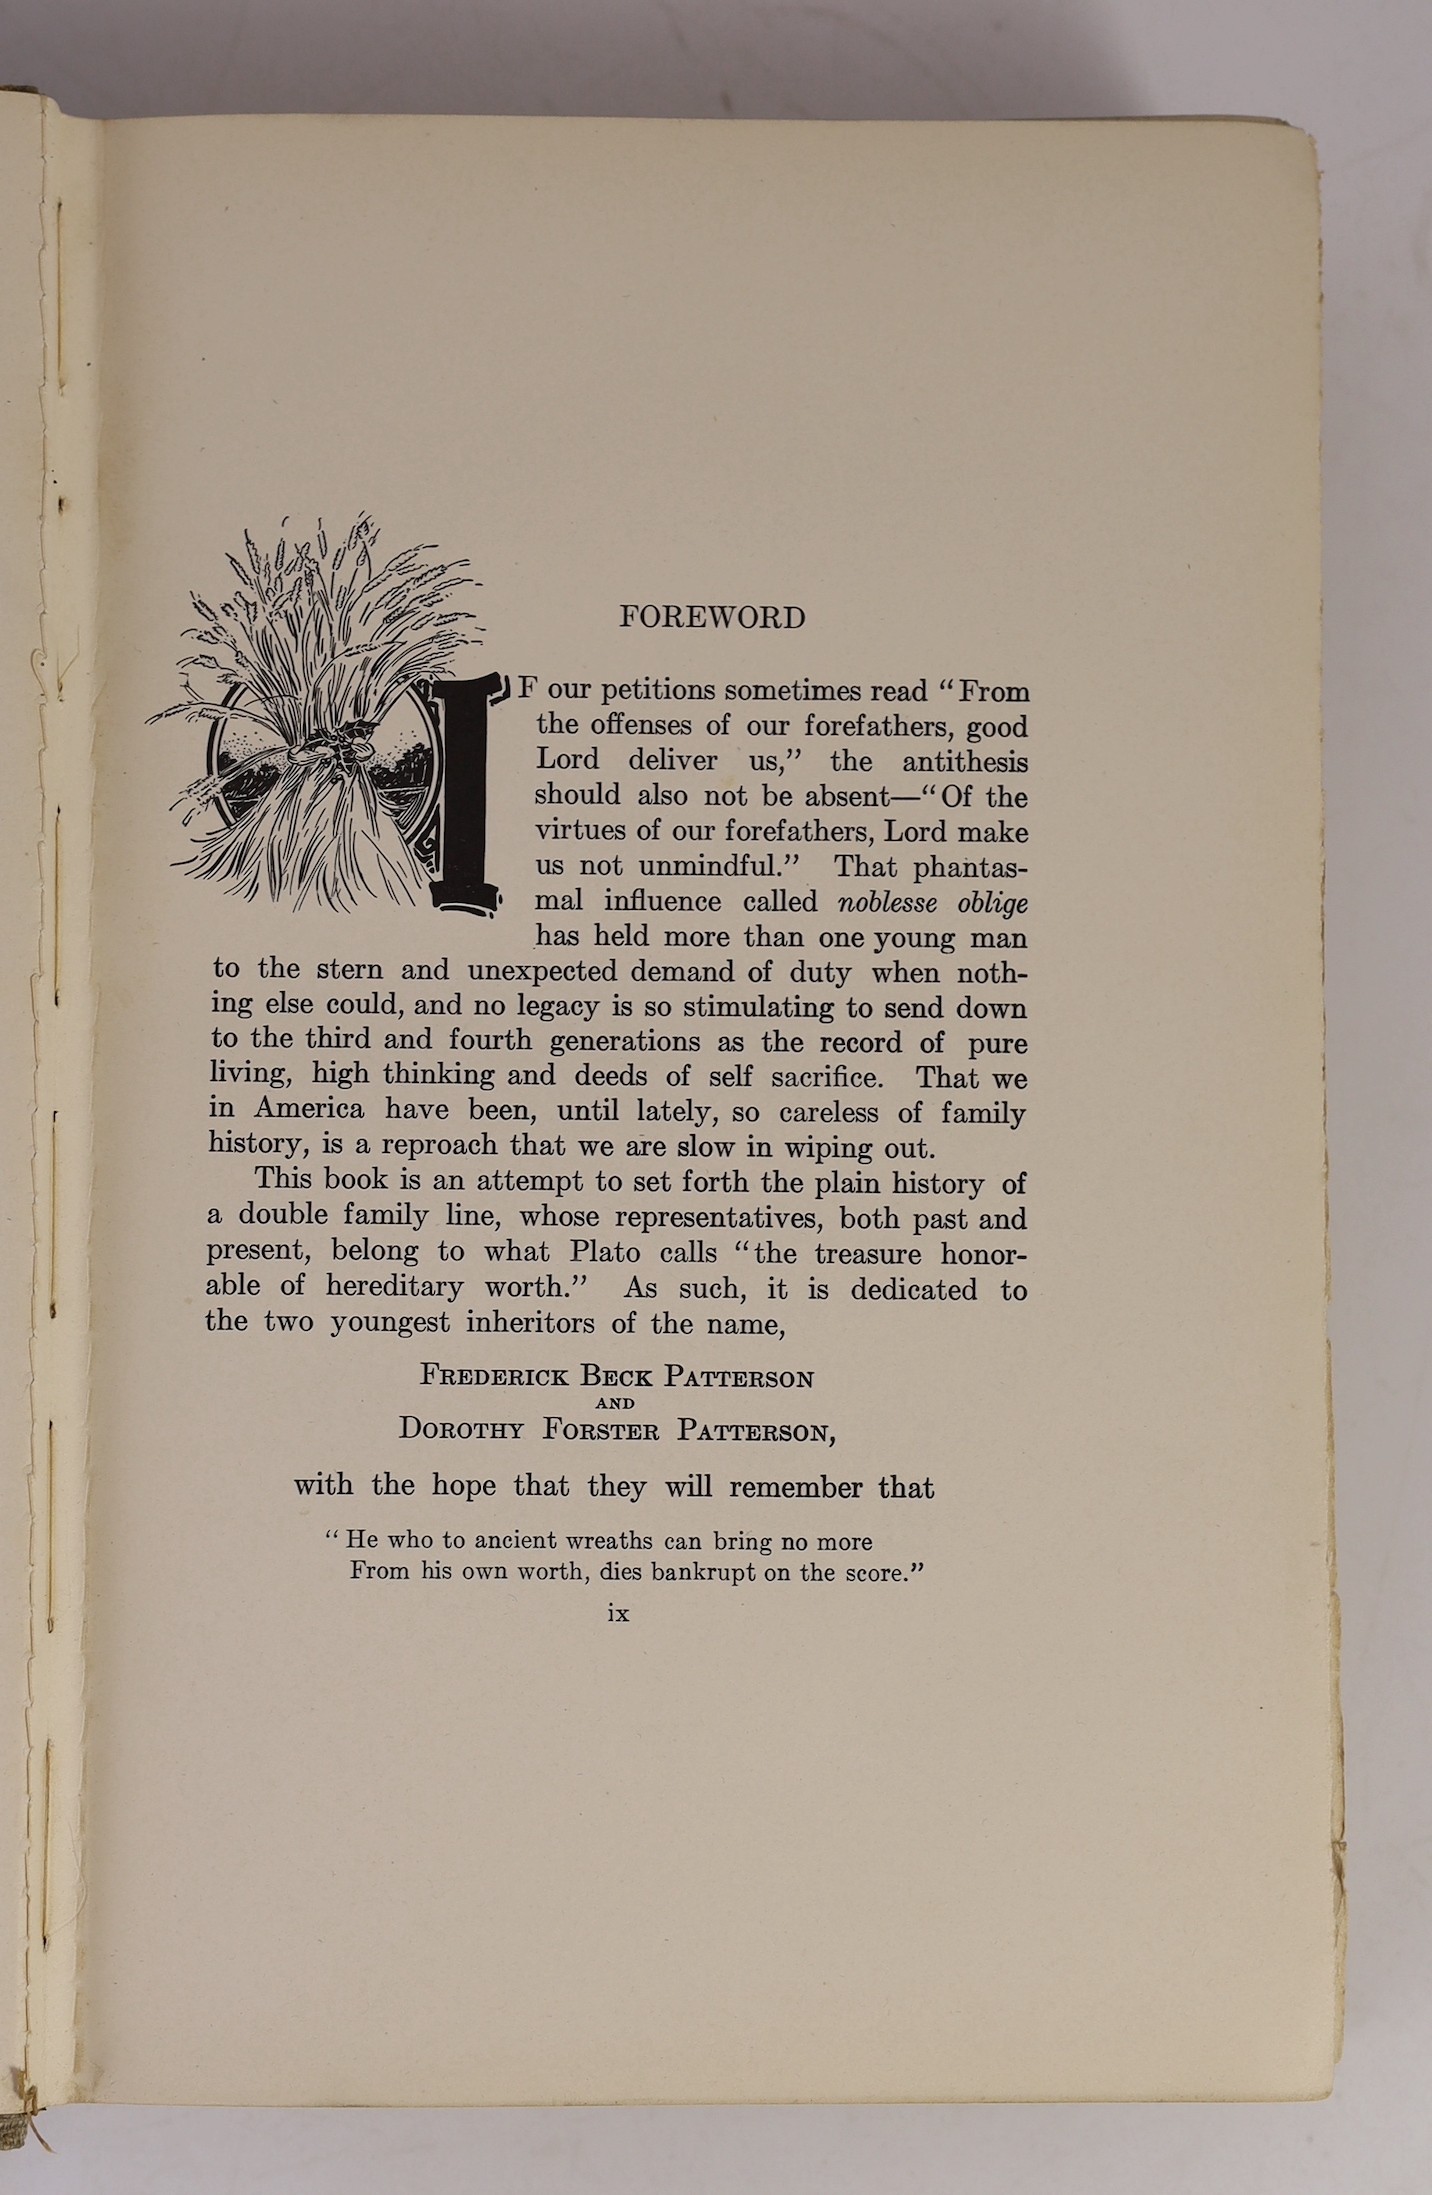 Patterson, Col. Robert and Johnston, Col. John - Concerning the Forefathers, one of 1000, 4to, cloth, Dayton, Ohio, 1902 and Aflalo, F.G - A Book of the Wilderness and Jungle, 8vo, cloth, S.W.Partridge & Co., Ltd., Londo